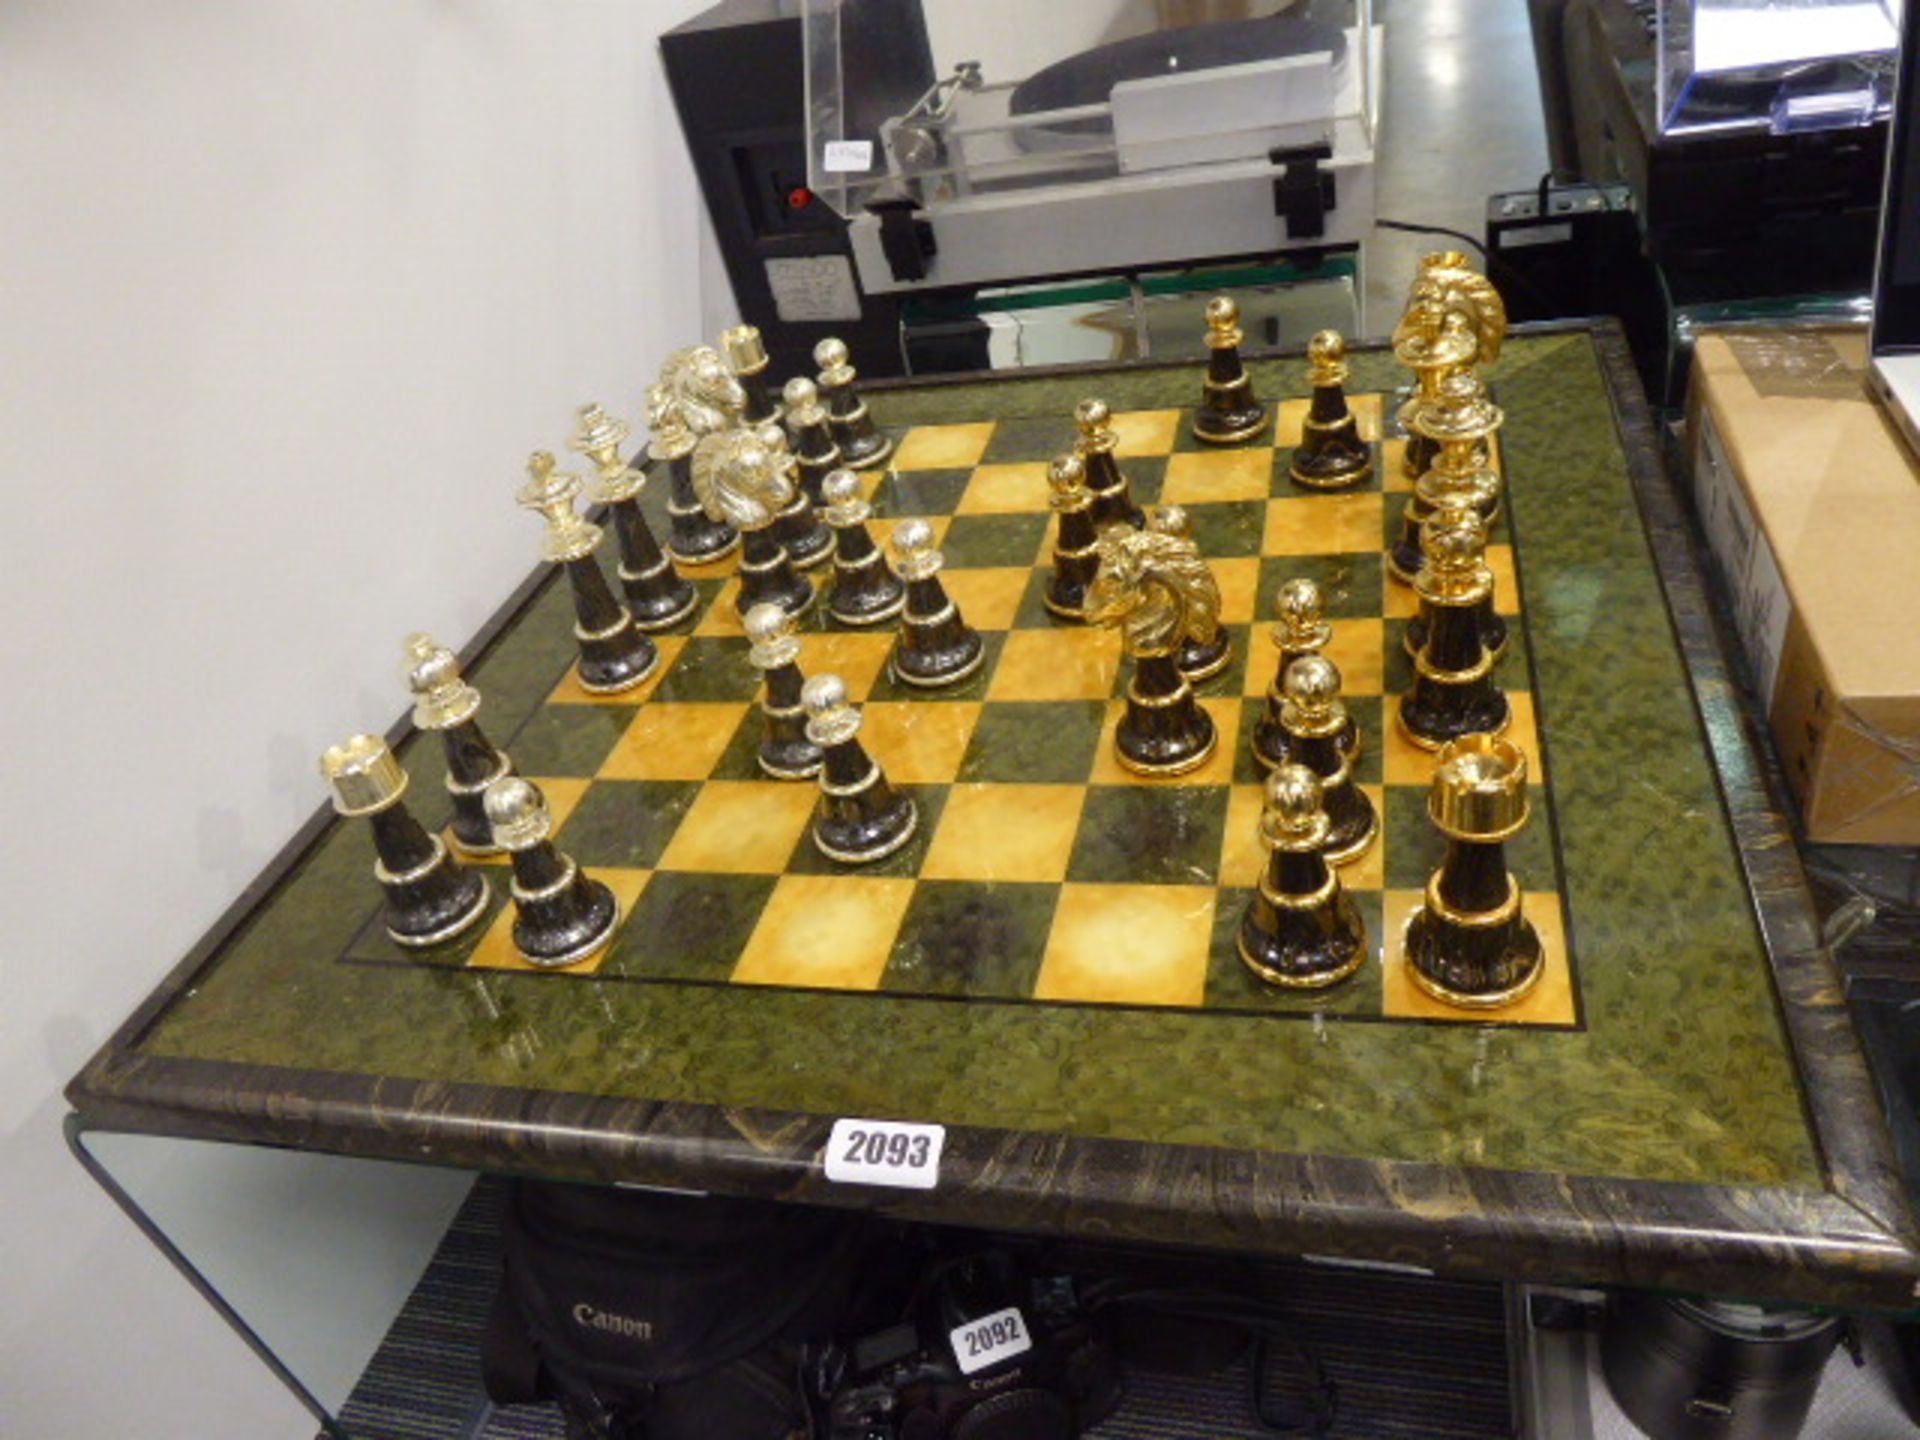 Chess set complete with 32 pieces on large board